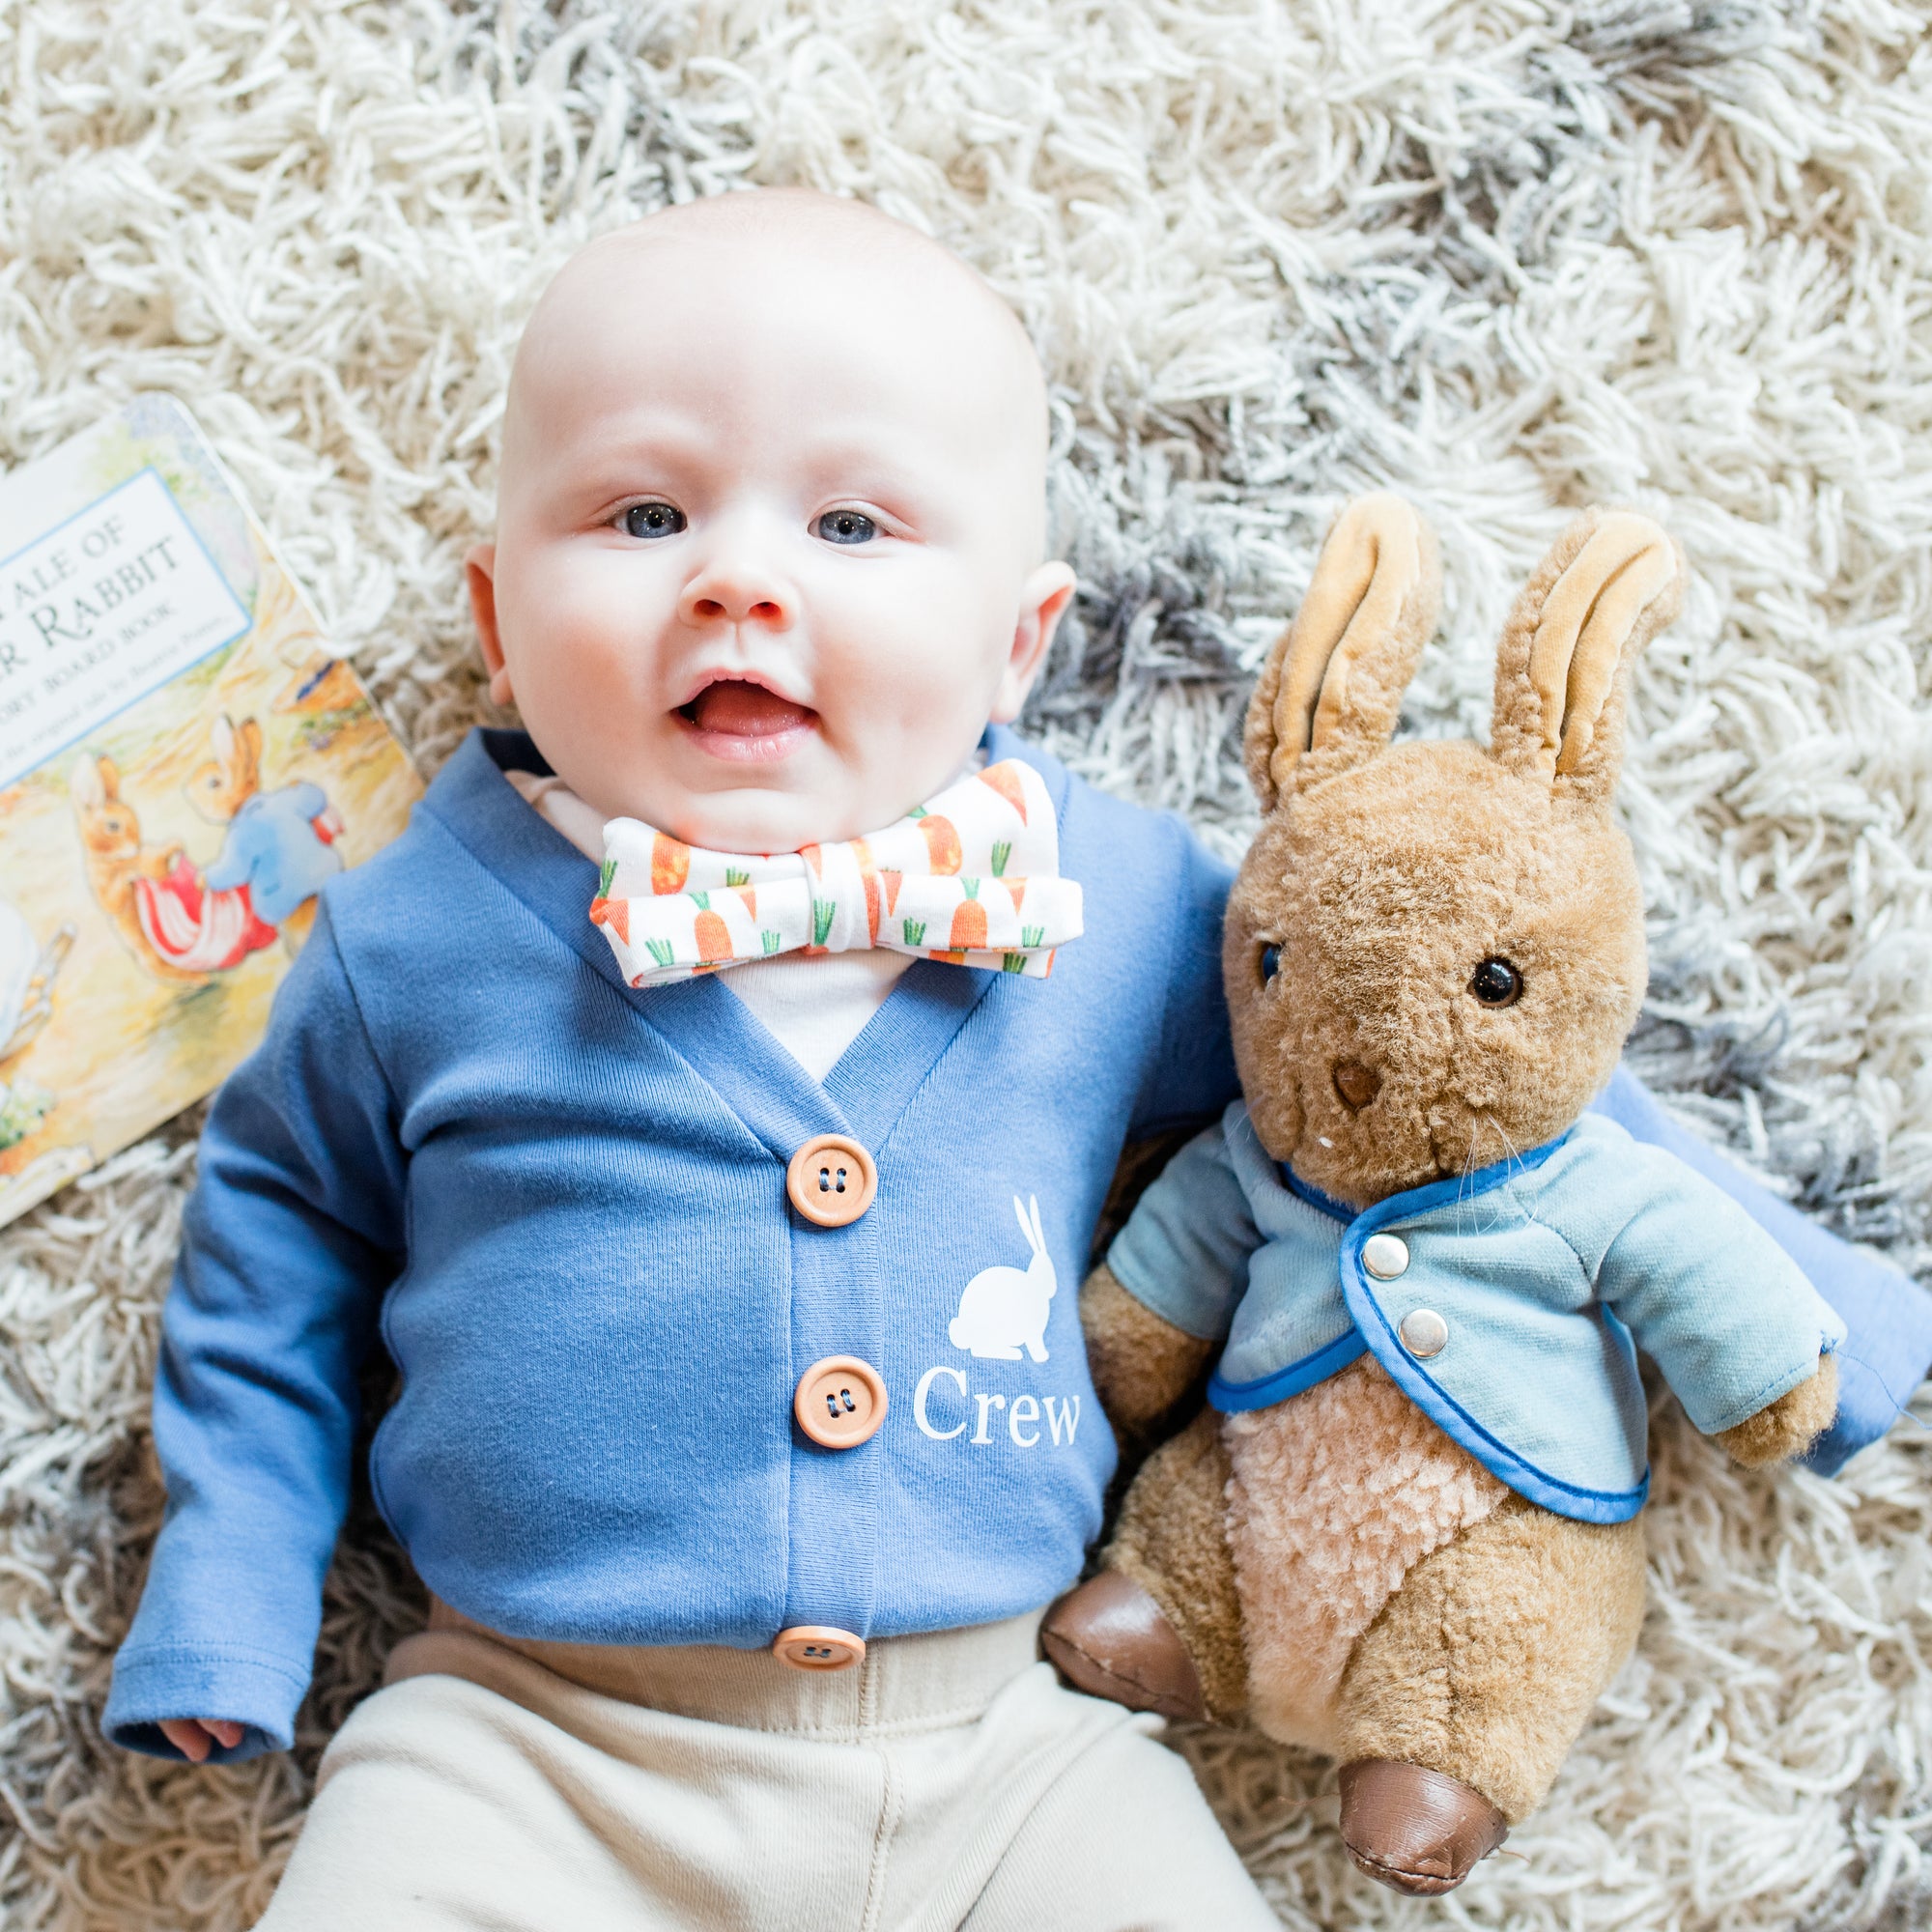 Baby Boy Easter Outfits - Cuddle Sleep Dream